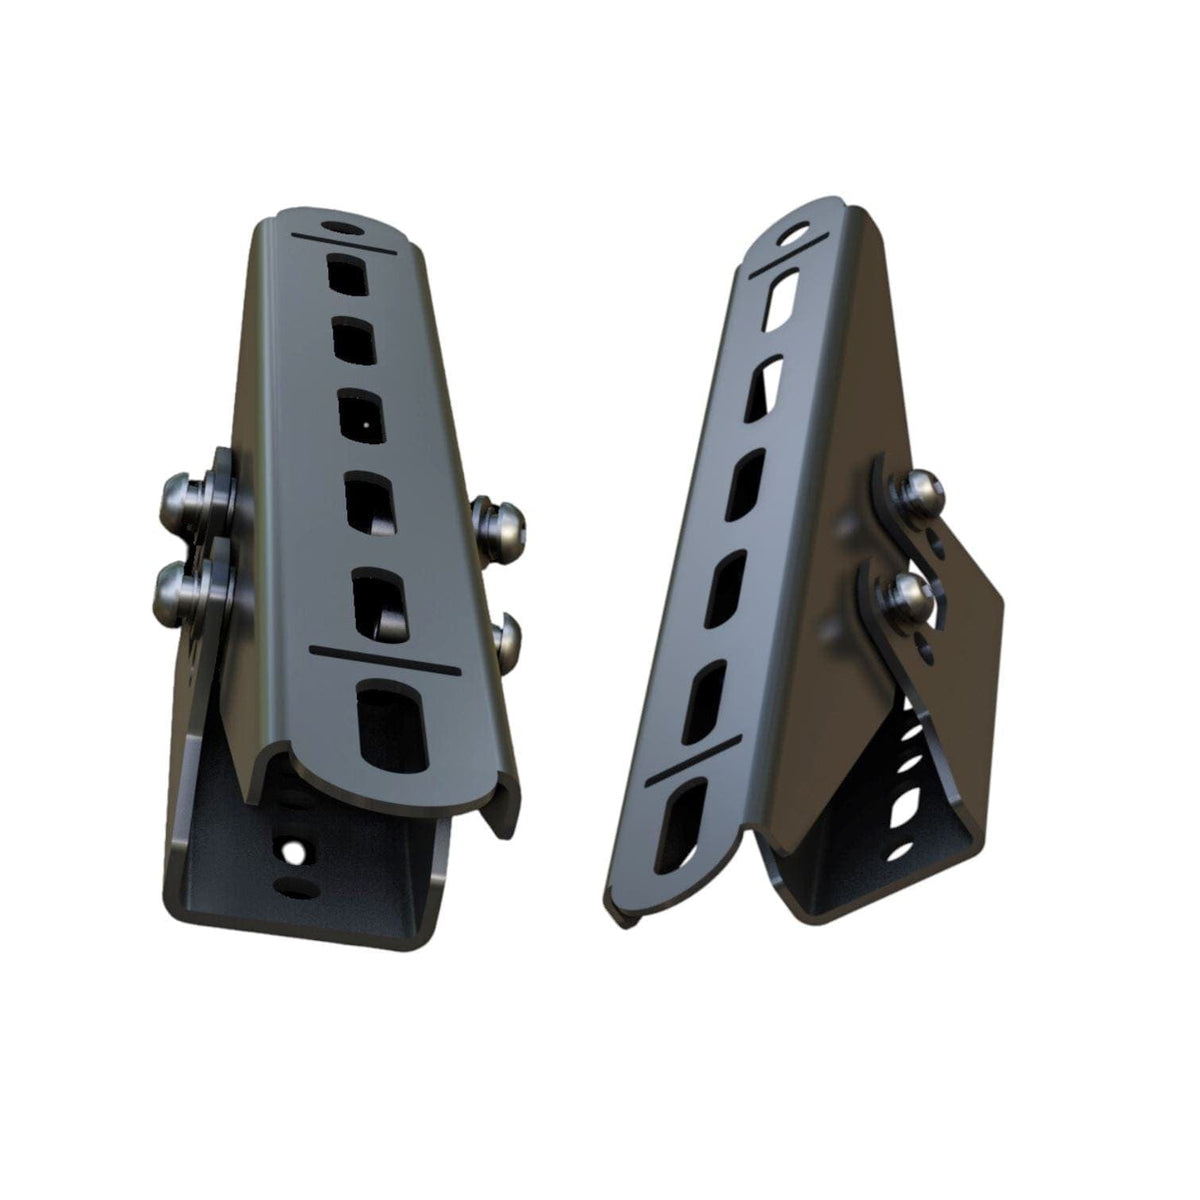 4CX Recovery Board Mounts